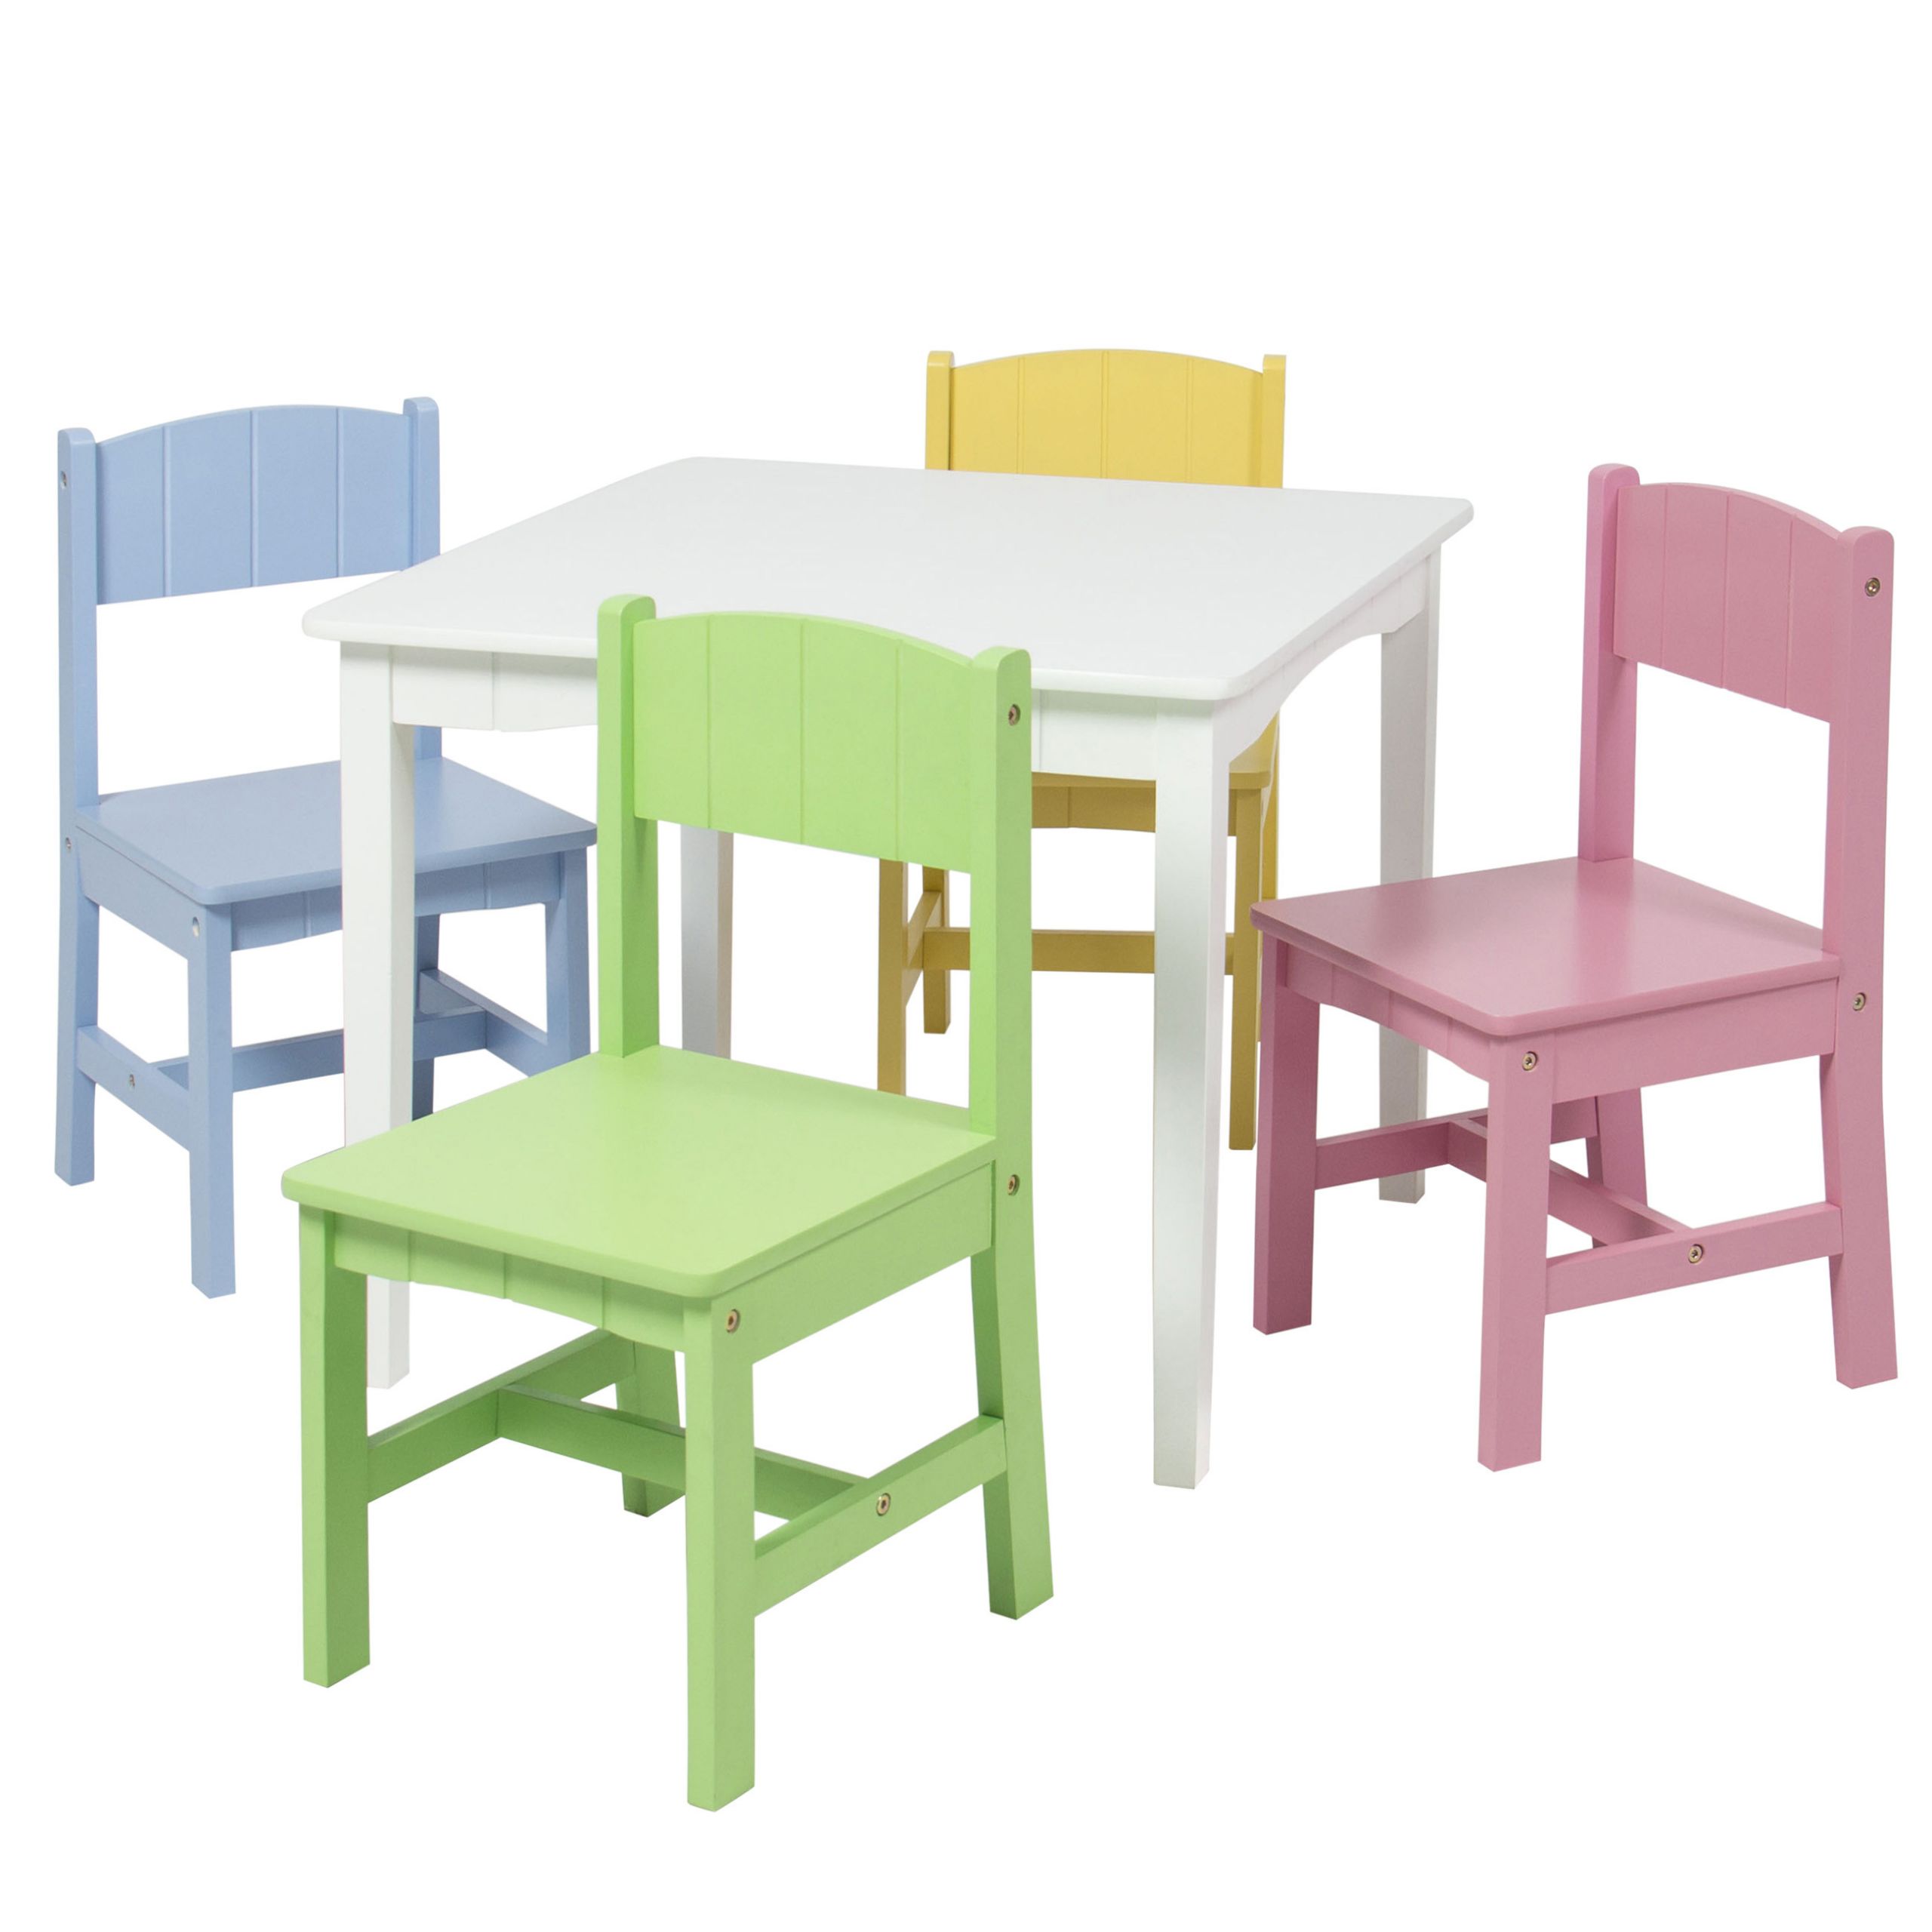 Kids Table And Chairs Walmart
 Wooden Kids Table And 4 Chairs Set Furniture Play Area